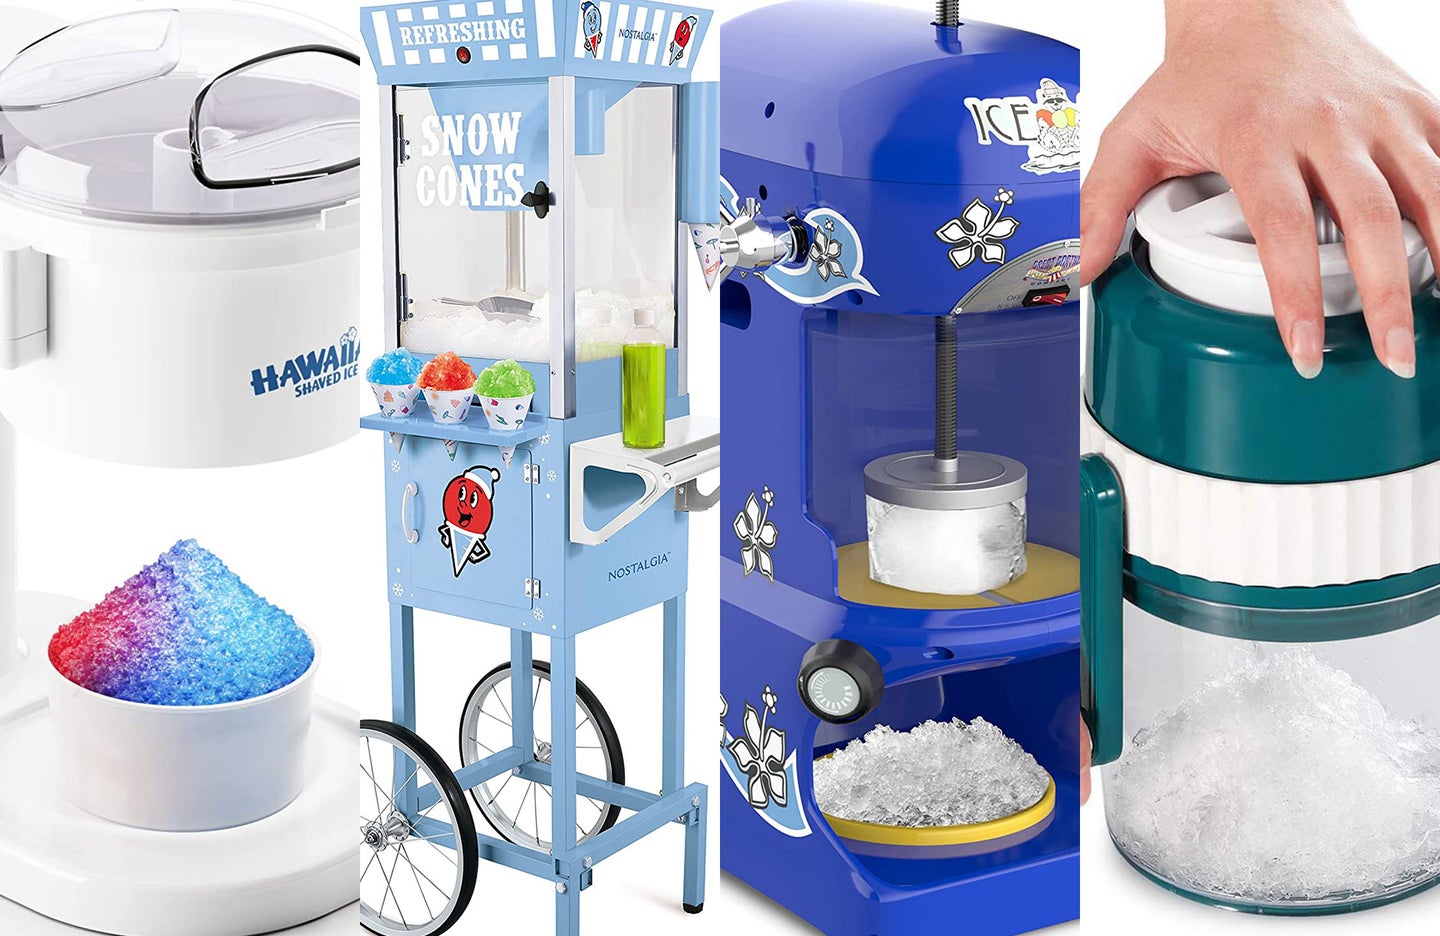 A lineup of snow-cone makers on a white background